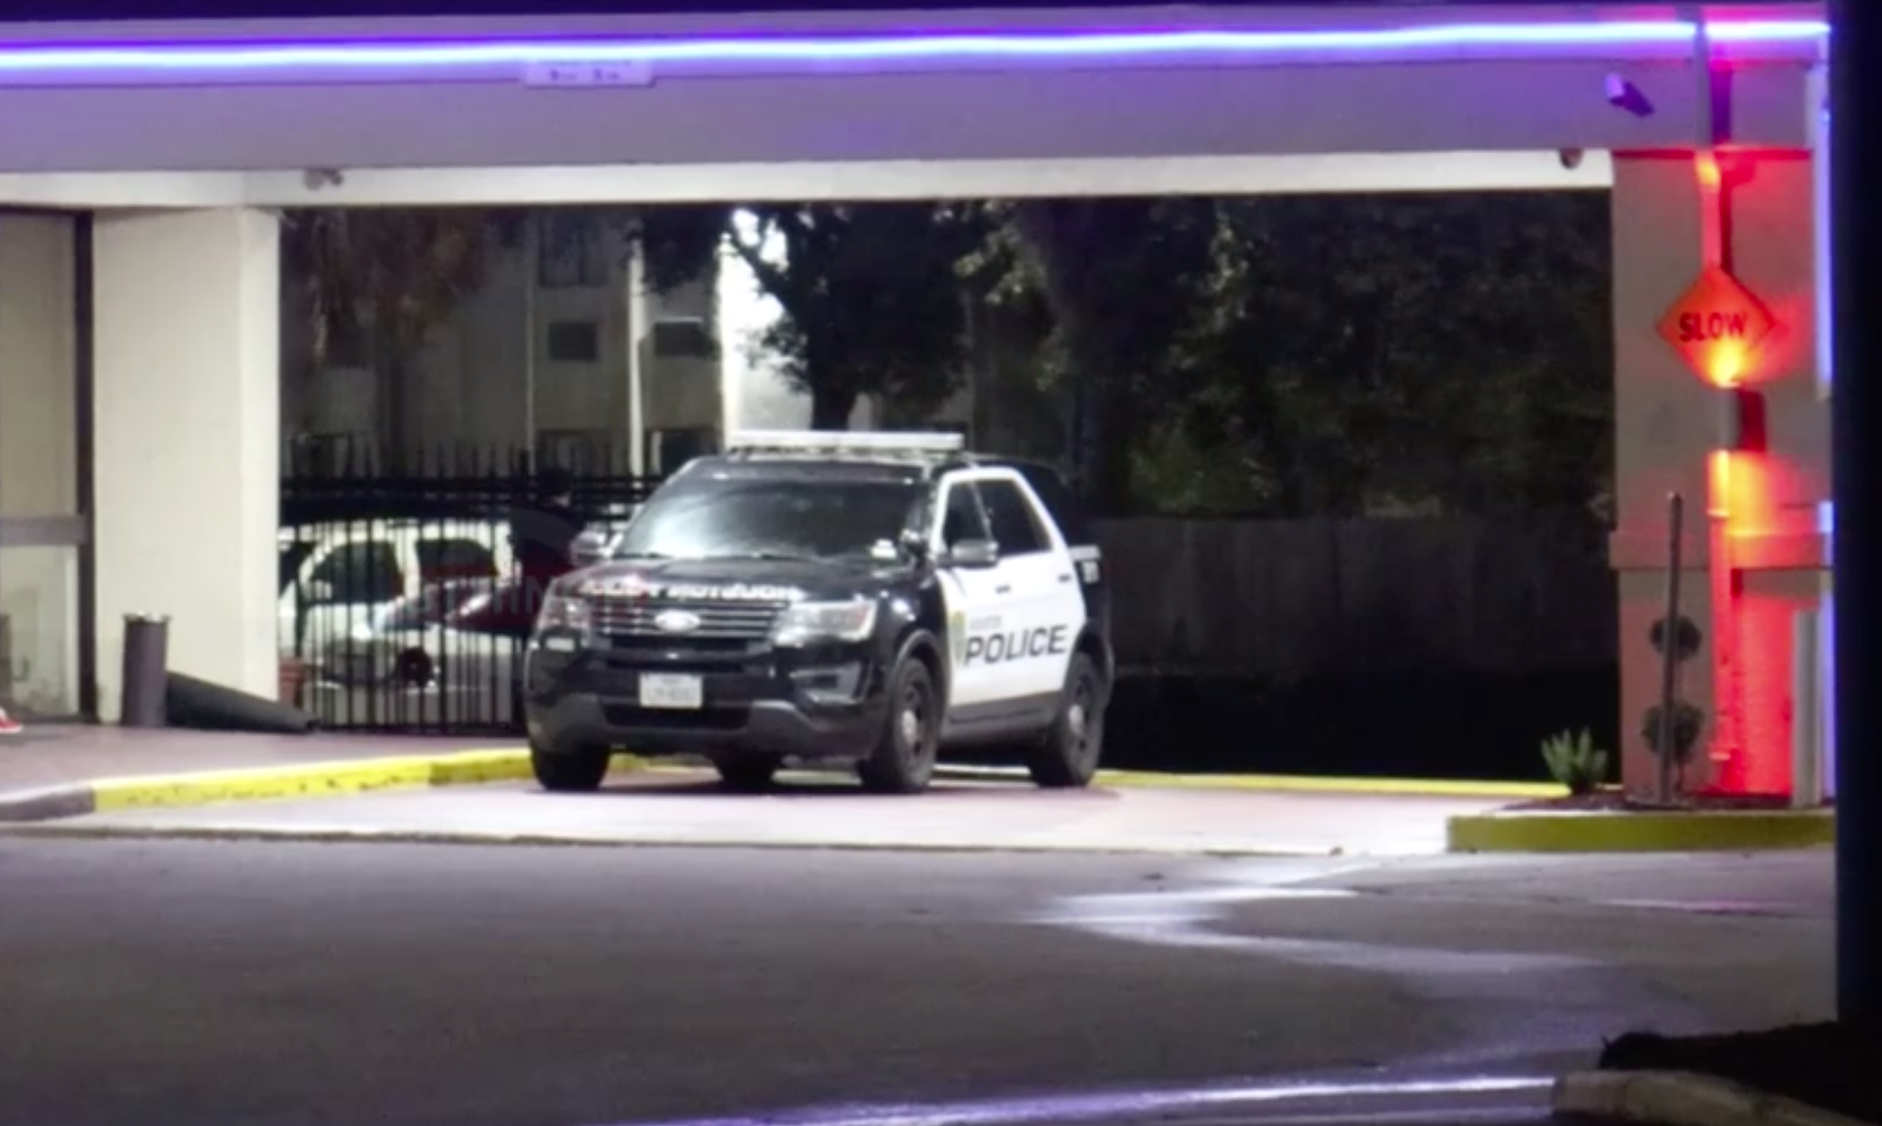 RAW Video: Shooting at the Motel 6 by Hobby Airport